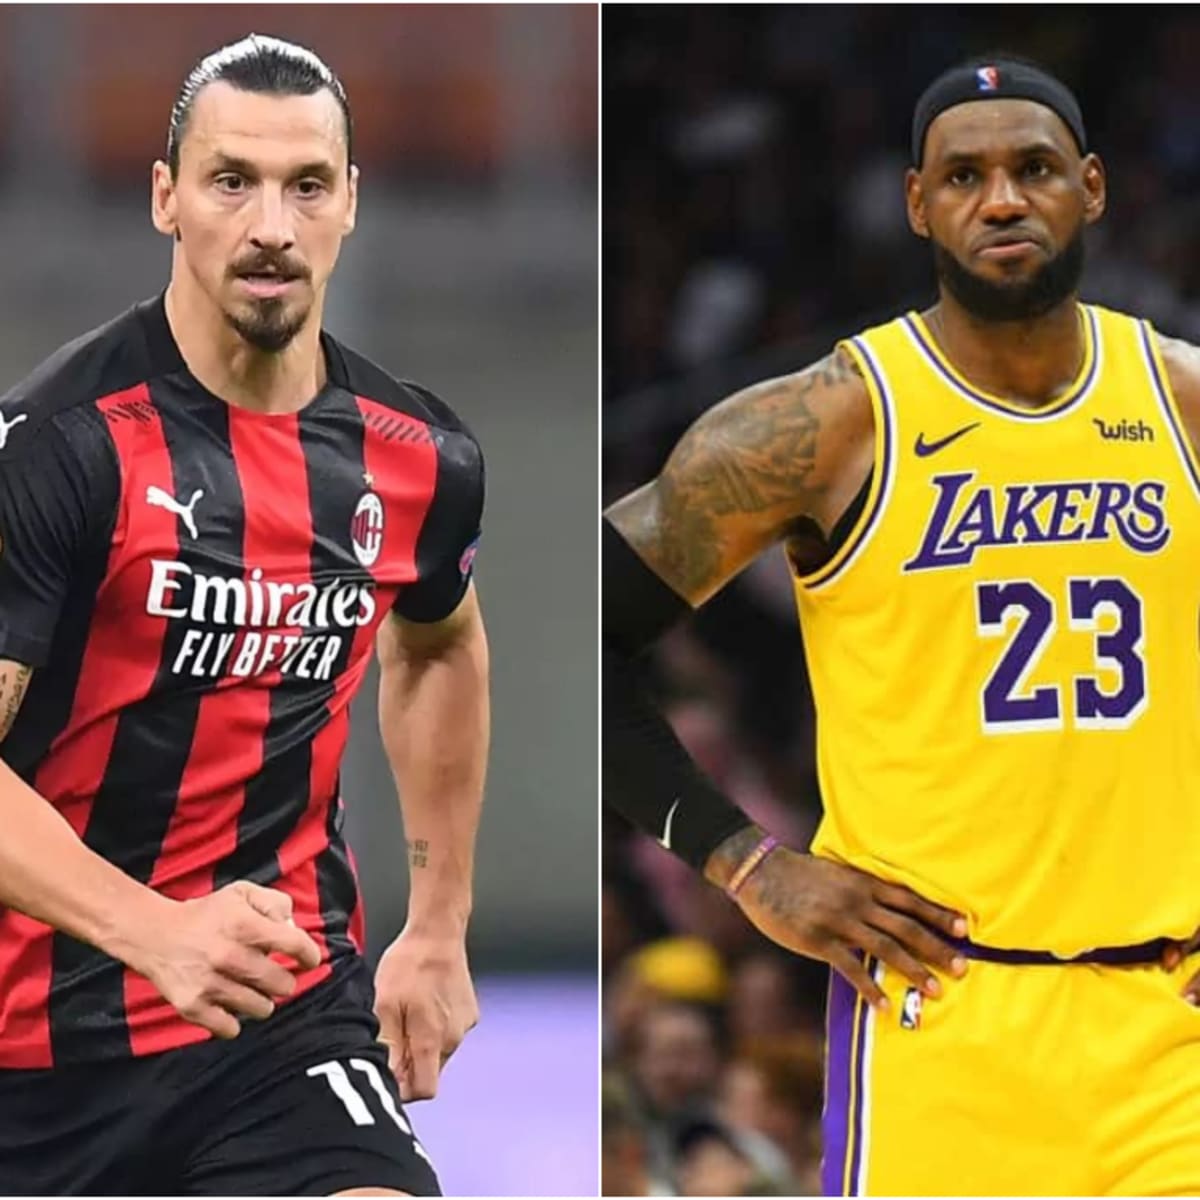 Football Tweet ⚽ on X: A feud between Zlatan Ibrahimović and Lebron James  is not what I was expecting from 2021. What are your thoughts on what both  athletes have said? 👇